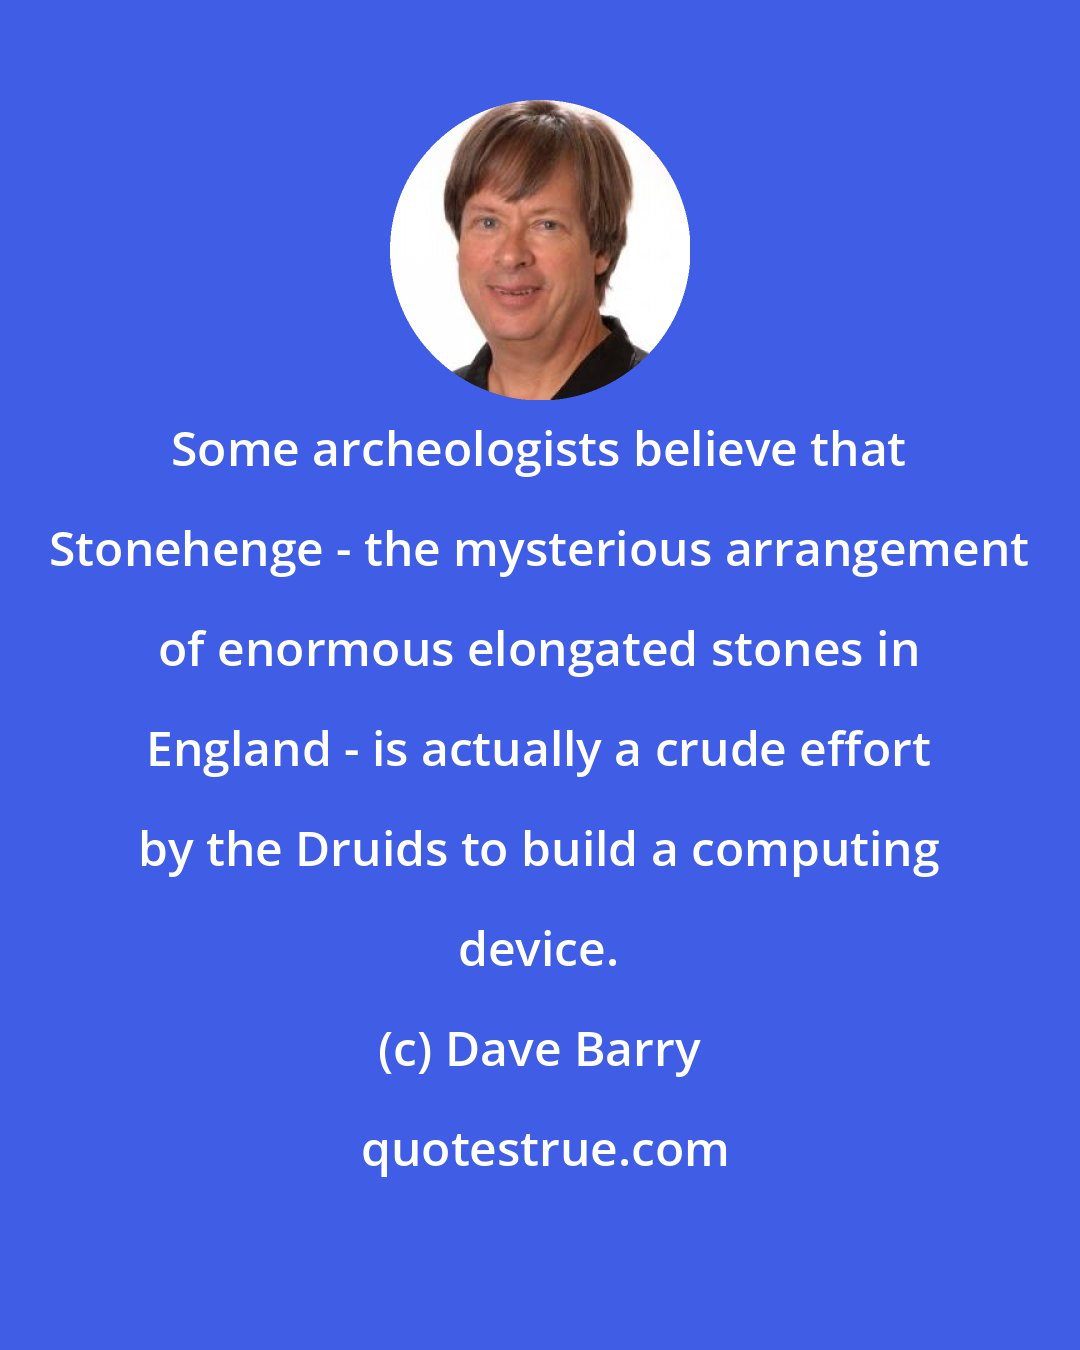 Dave Barry: Some archeologists believe that Stonehenge - the mysterious arrangement of enormous elongated stones in England - is actually a crude effort by the Druids to build a computing device.